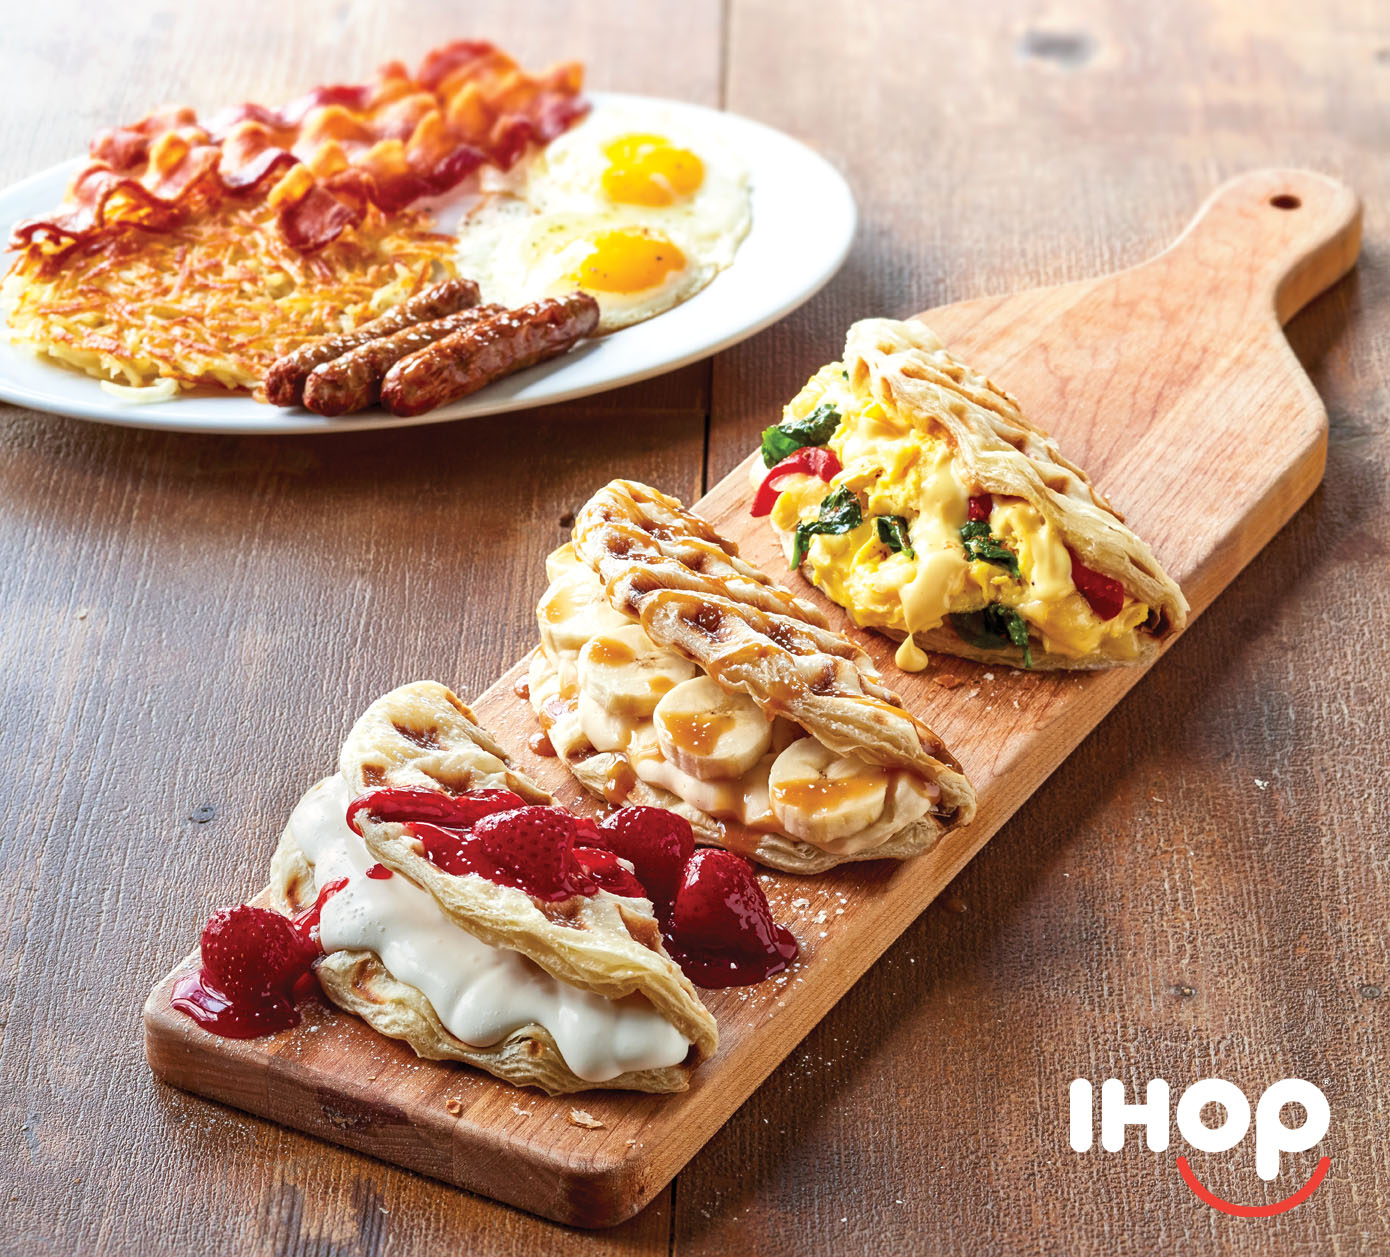 The innovative IHOP dish that revolutionized breakfast is back with three new delicious flavor combinations.